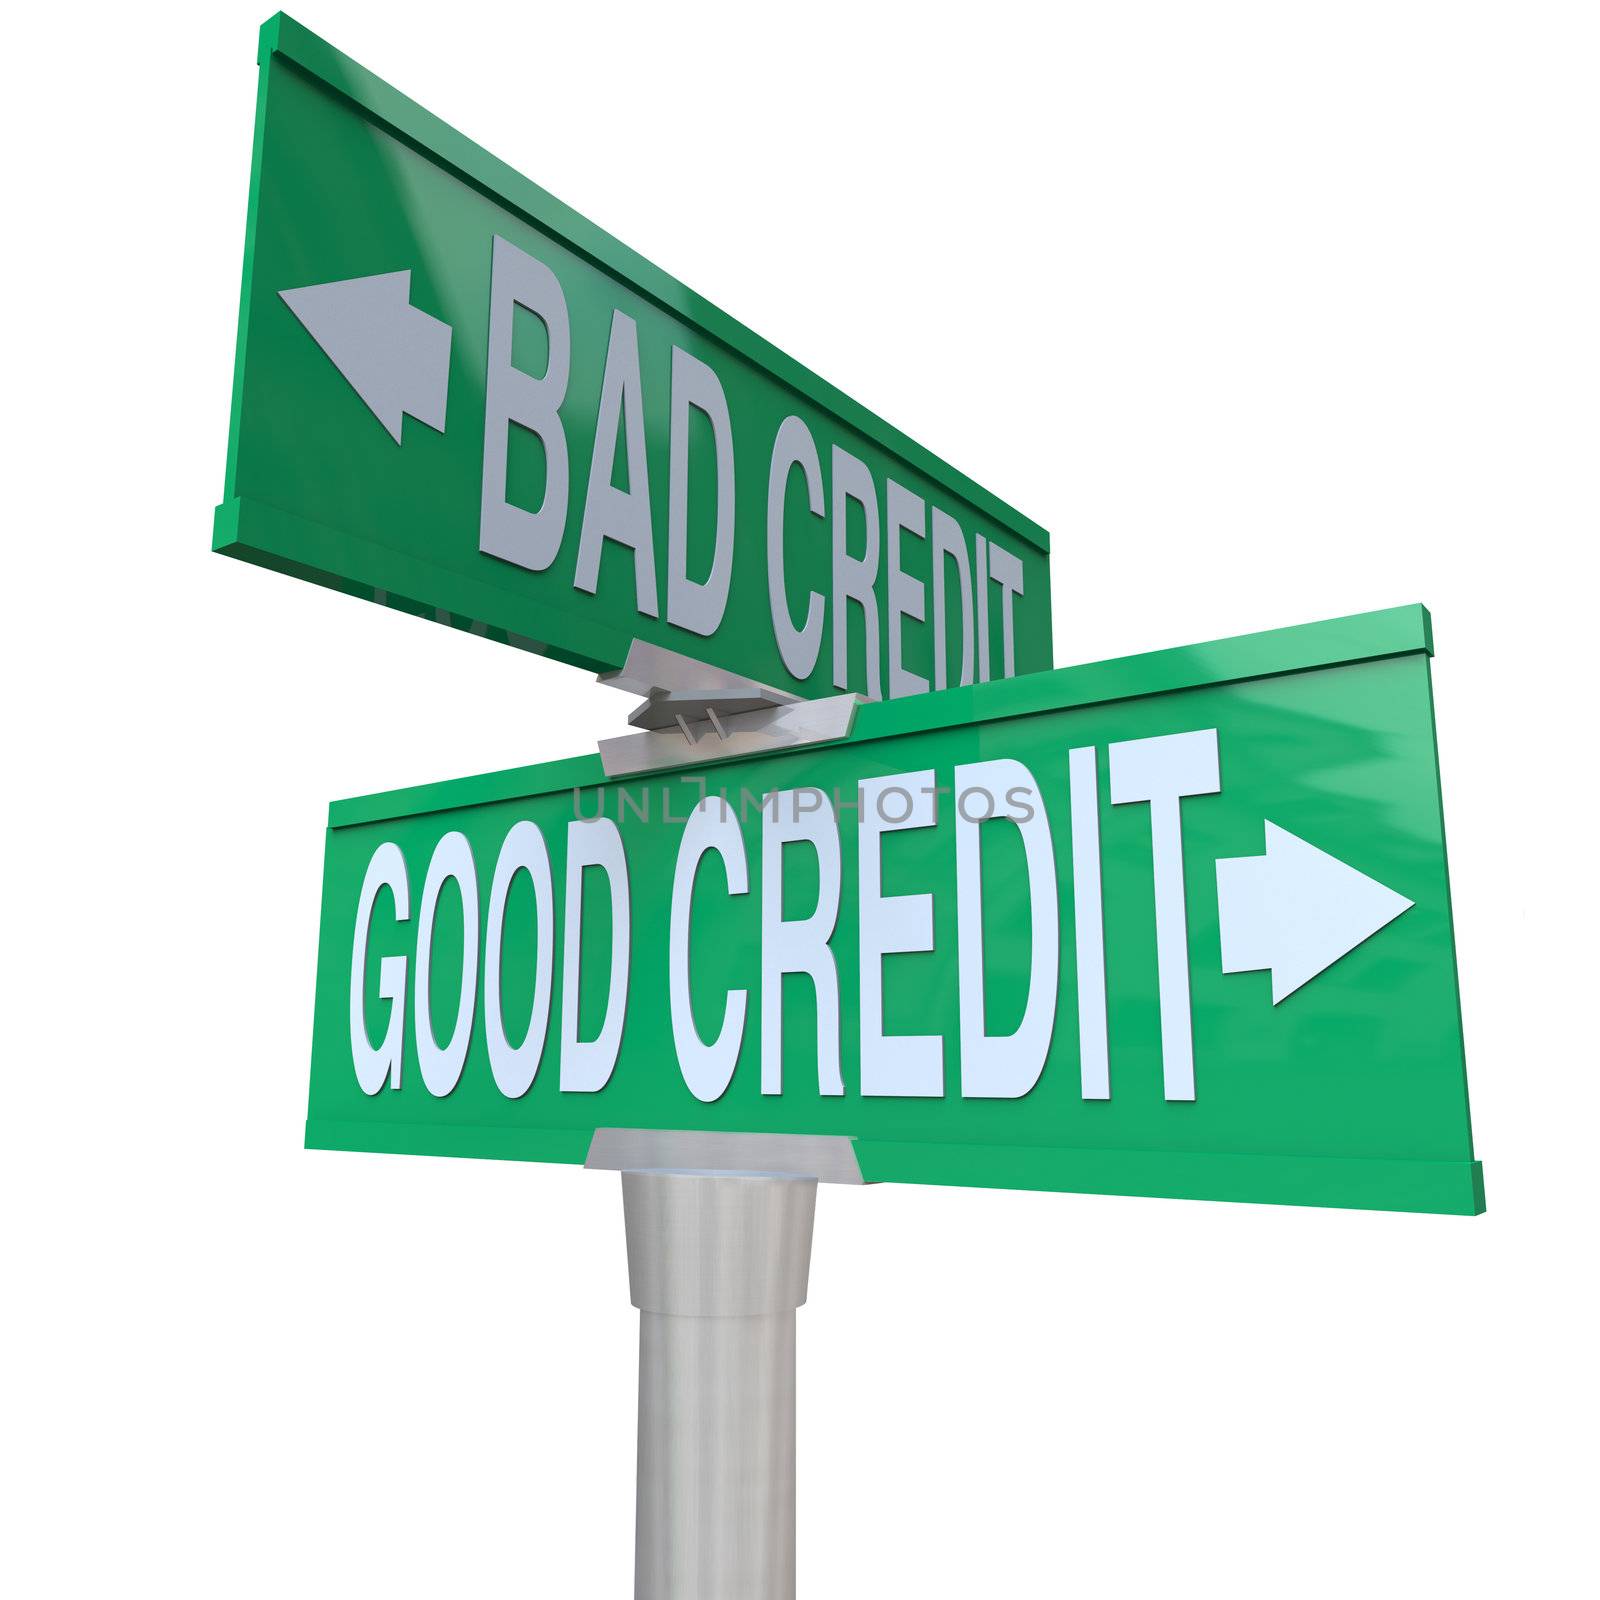 Good vs Bad Credit - Two-Way Street Sign by iQoncept